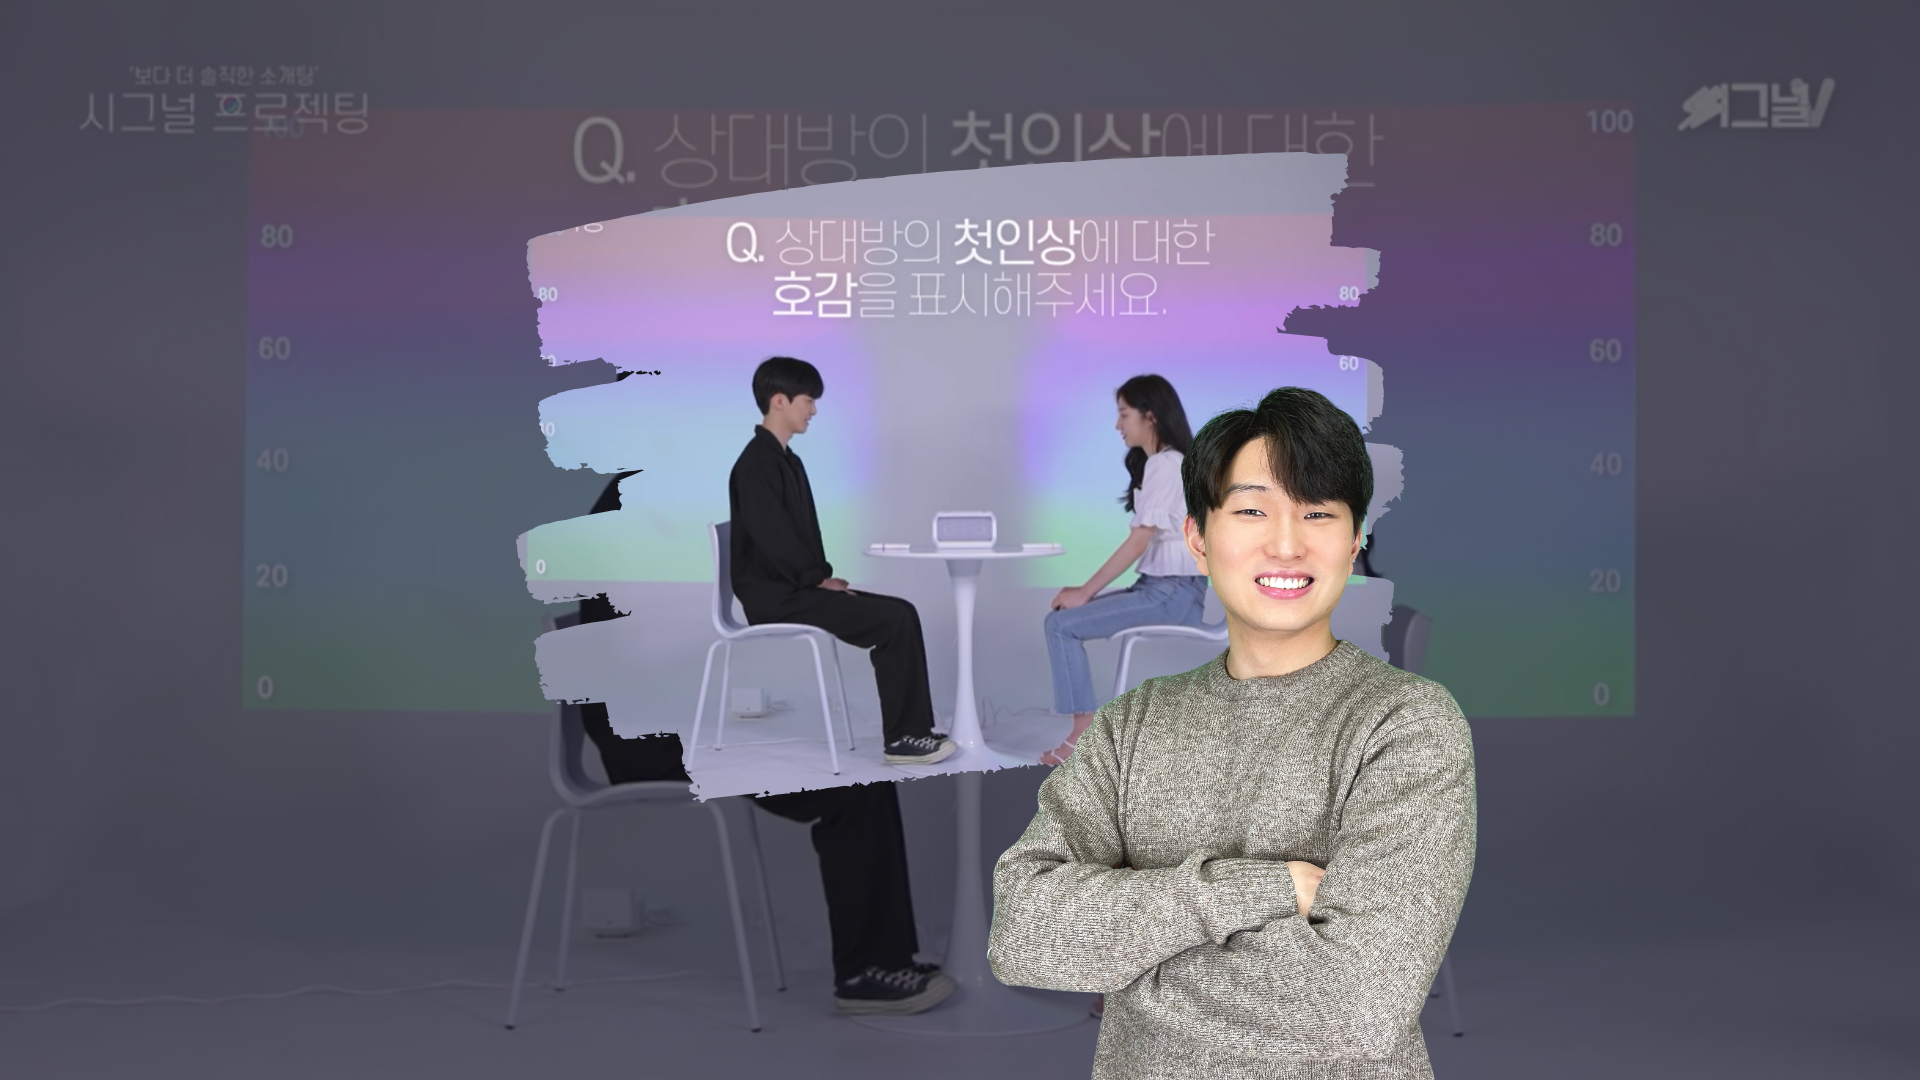 Learning Korean with blind date video